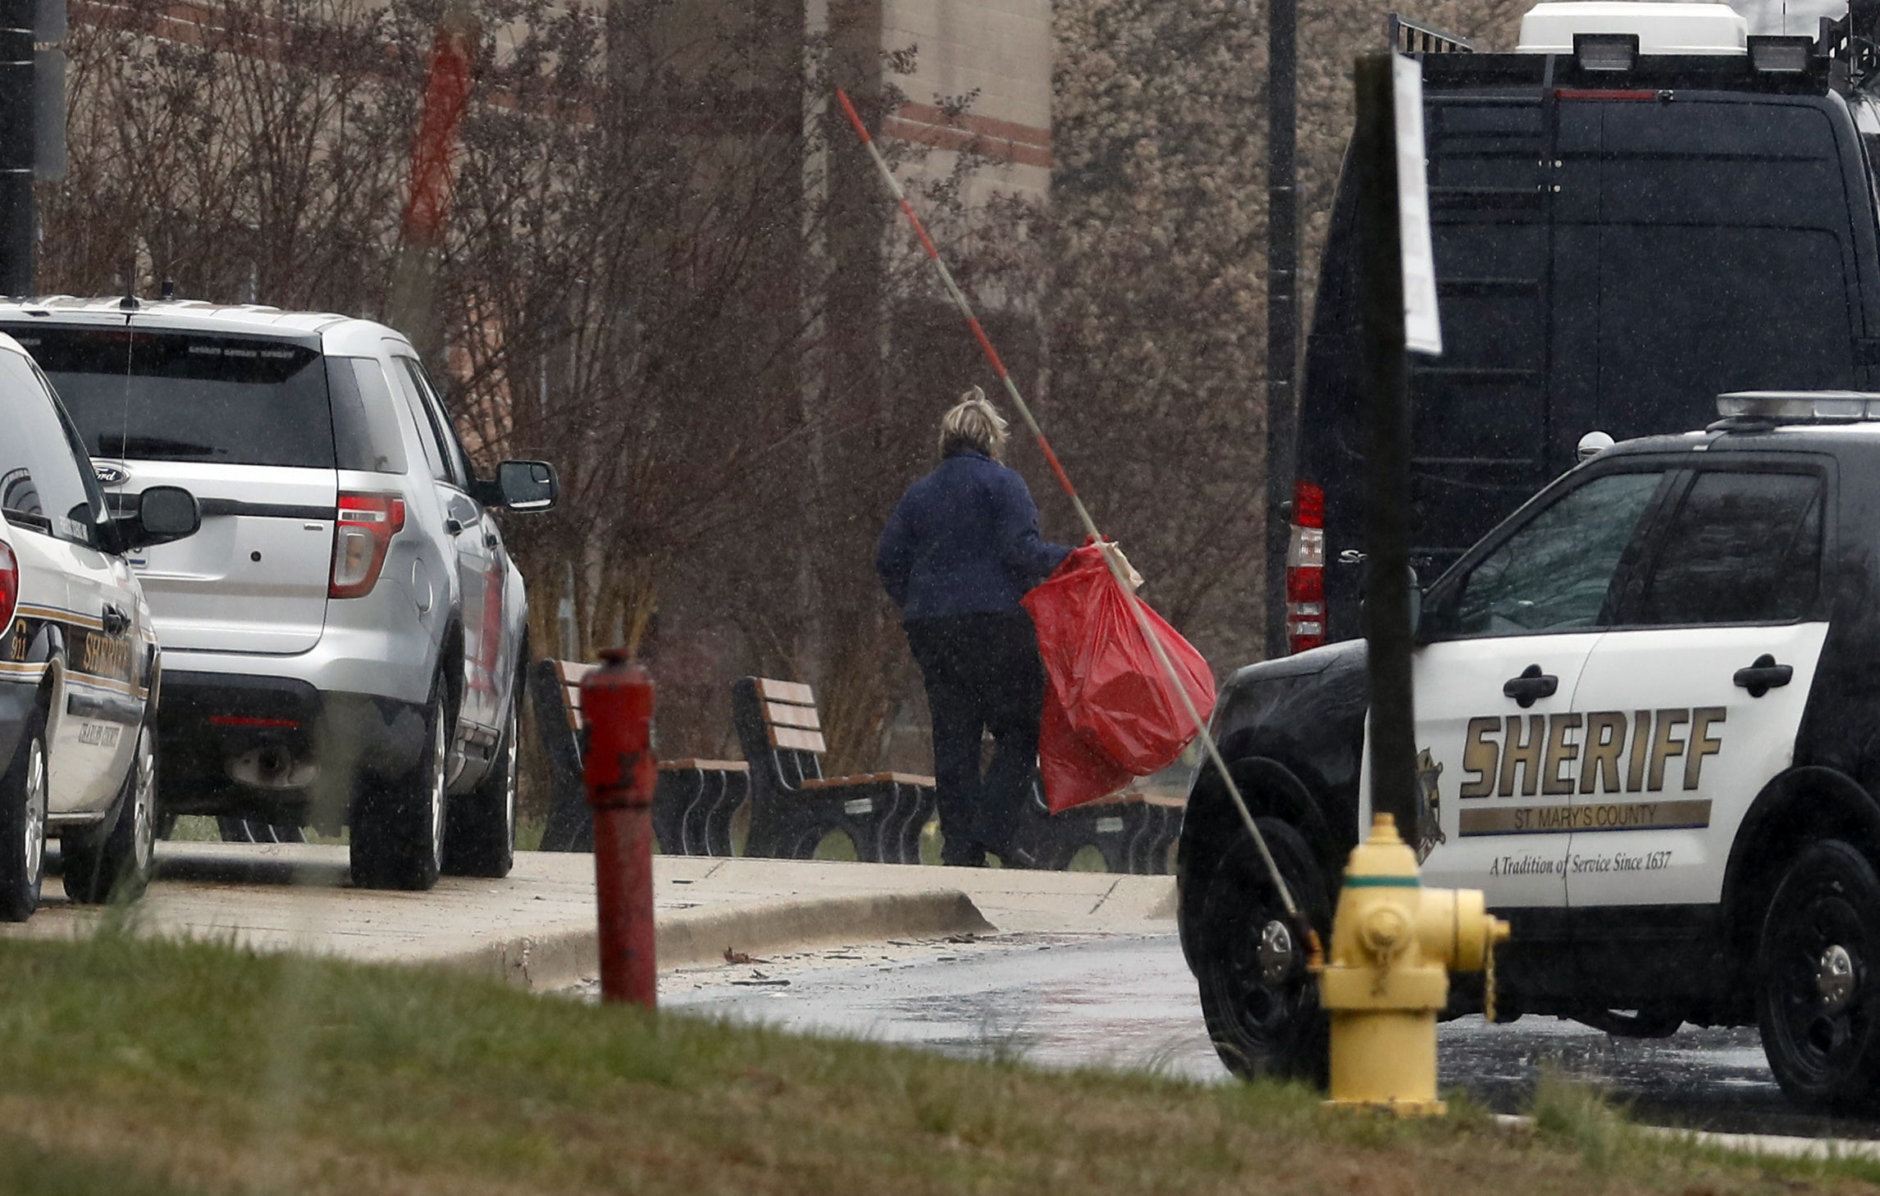 A bag is removed and taken to the crime scene van at Great Mills High School, the scene of a shooting, Tuesday, March 20, 2018, in Great Mills. A student with a handgun shot two classmates inside the school before he was fatally wounded during a confrontation with a school resource officer, a sheriff said.  (AP Photo/Alex Brandon)